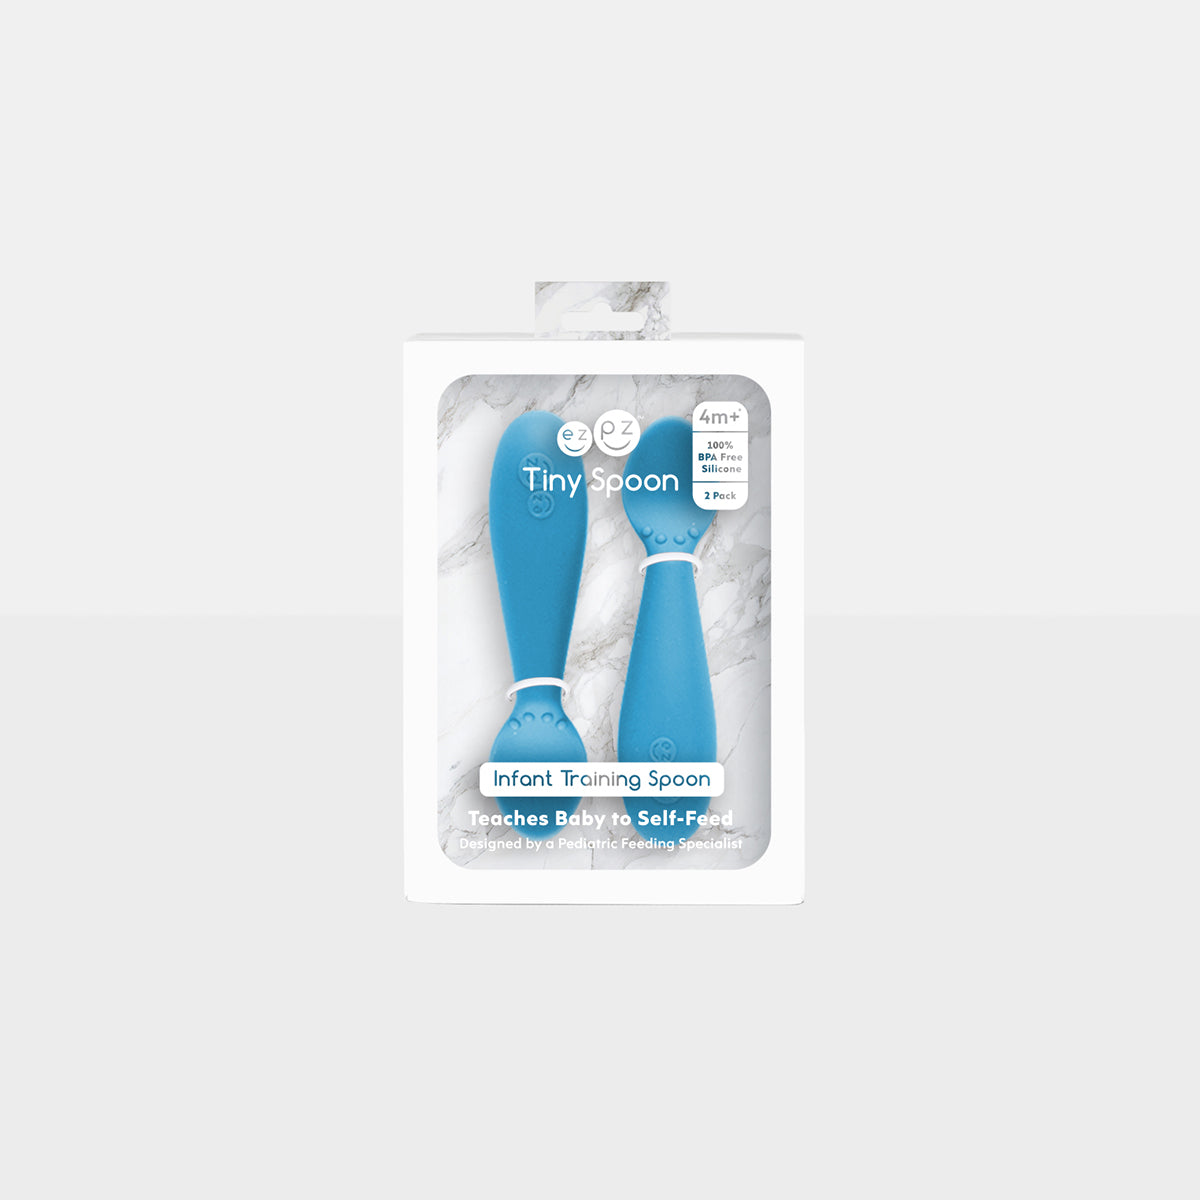 The Tiny Spoon in Blue by ezpz / Small, Sensory Silicone Spoon for Babies